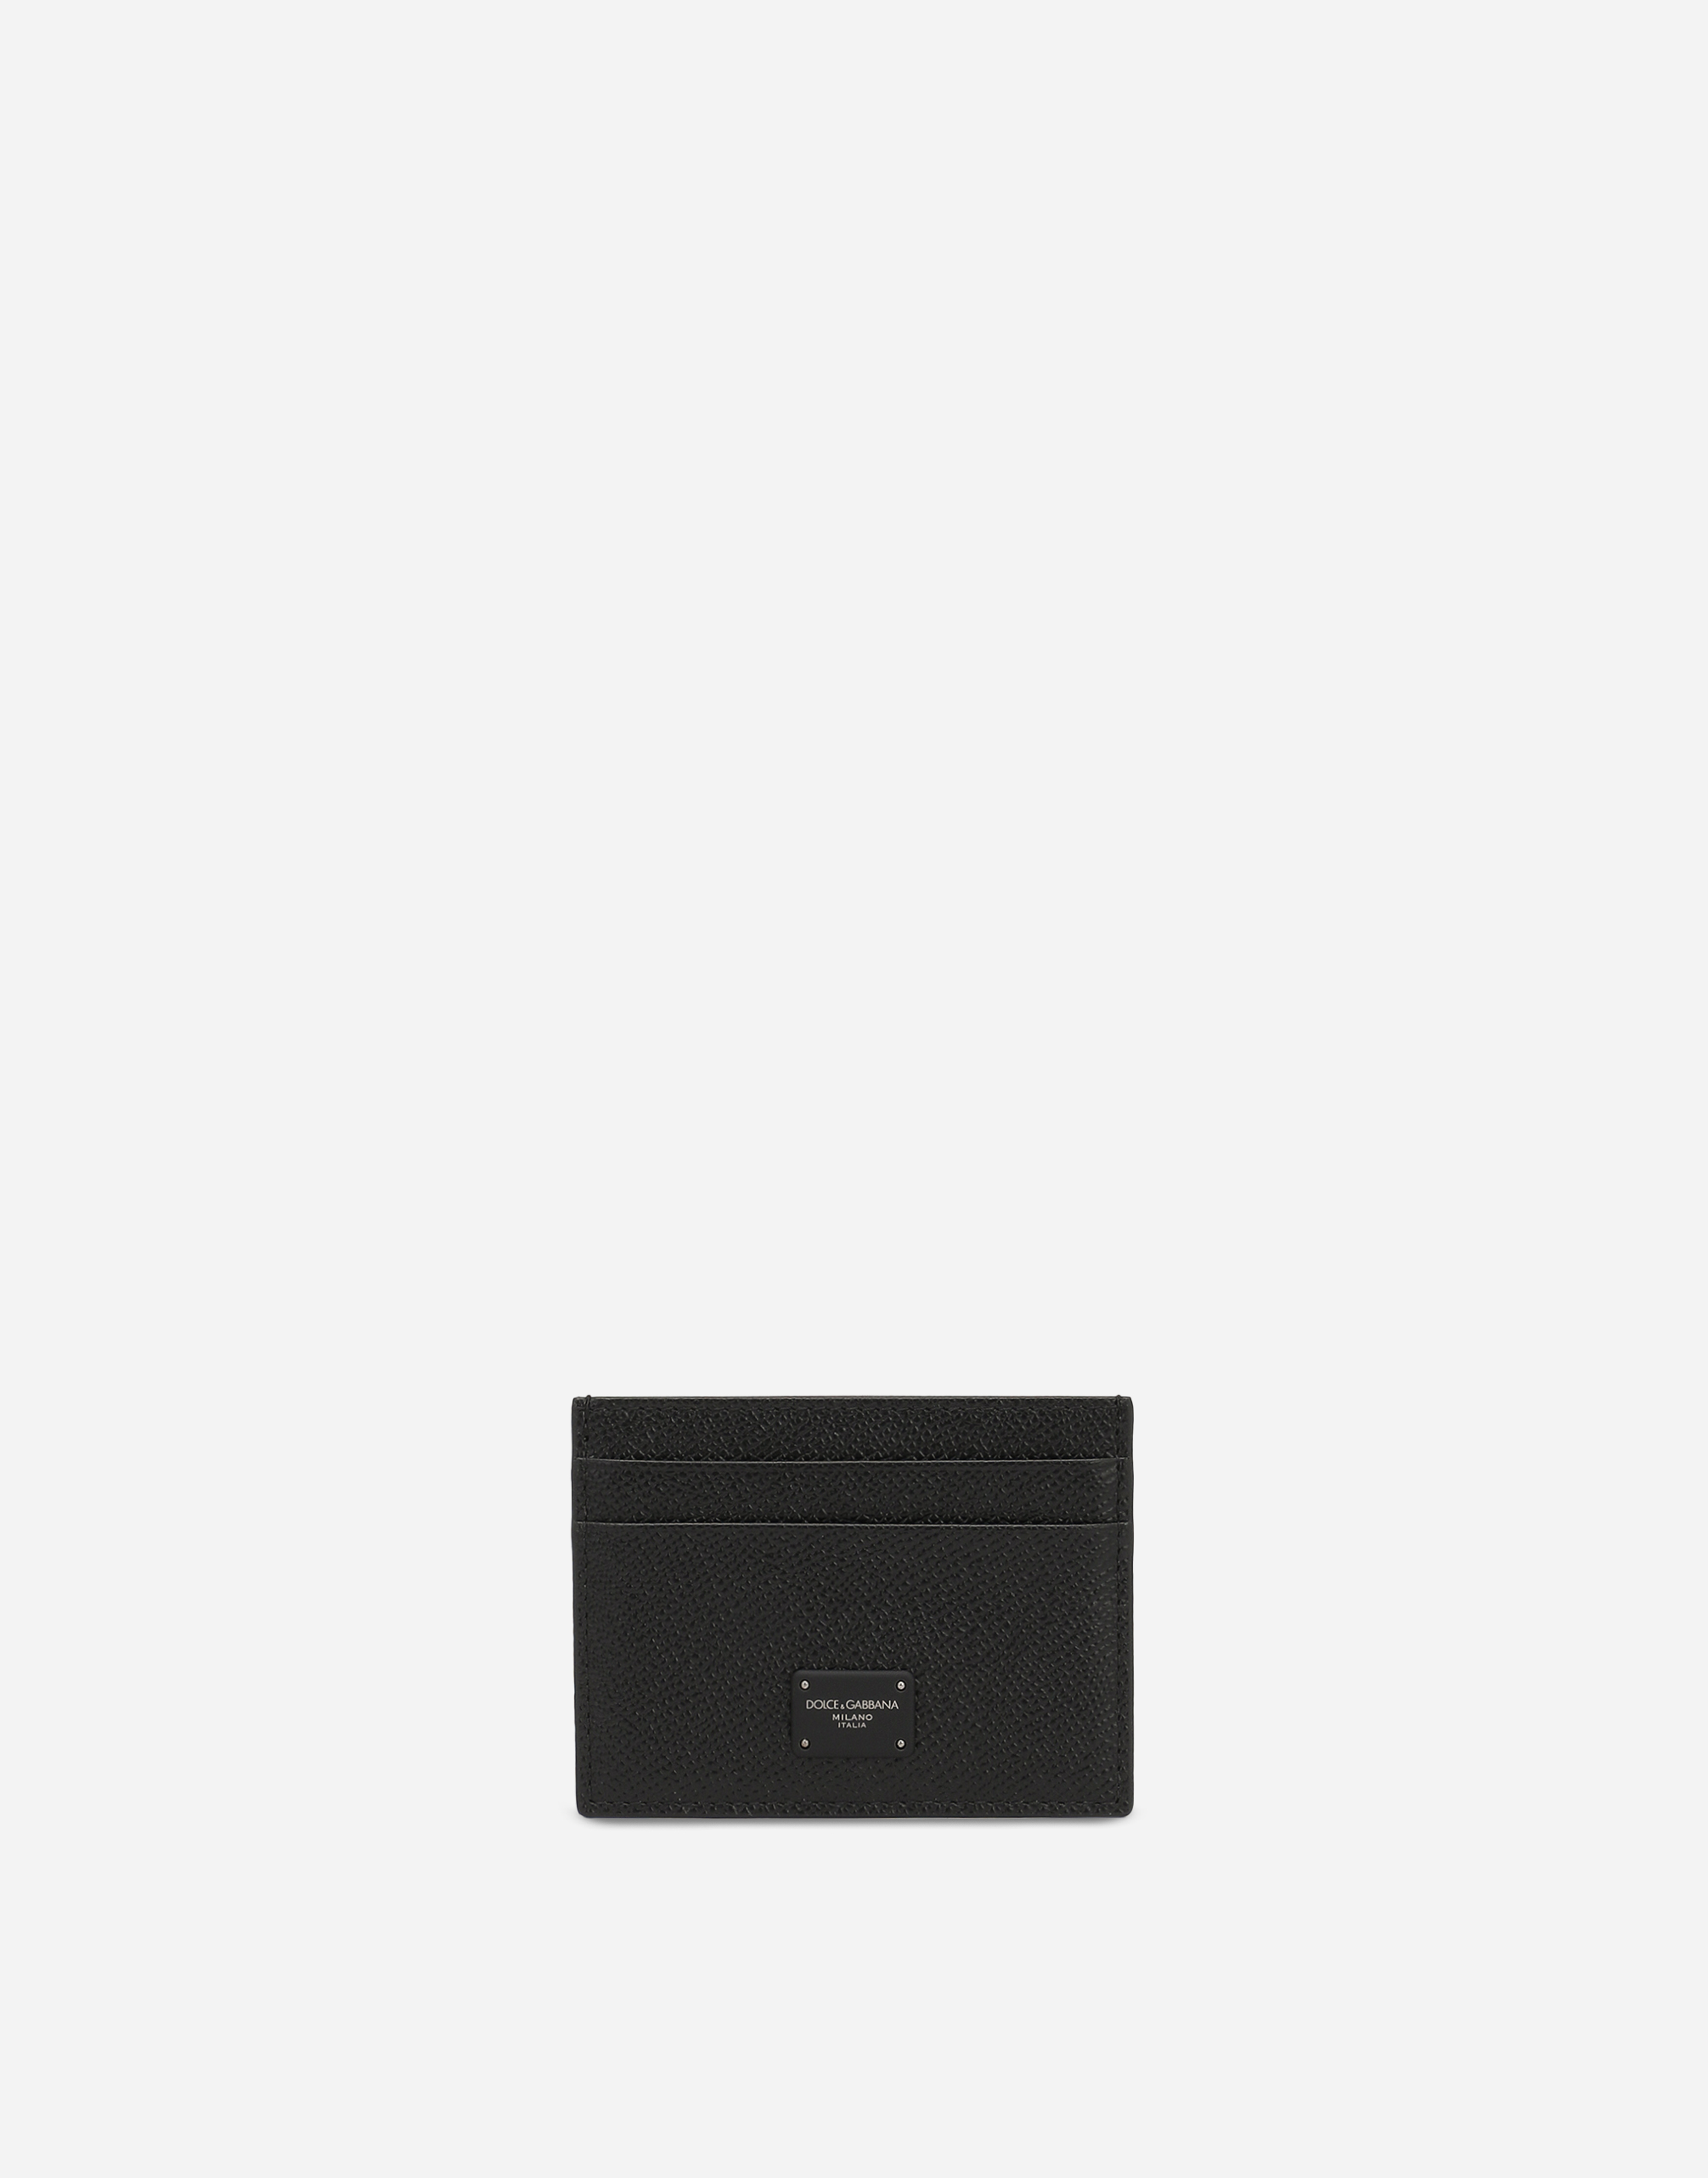 Dauphine calfskin card holder with branded plate in Black